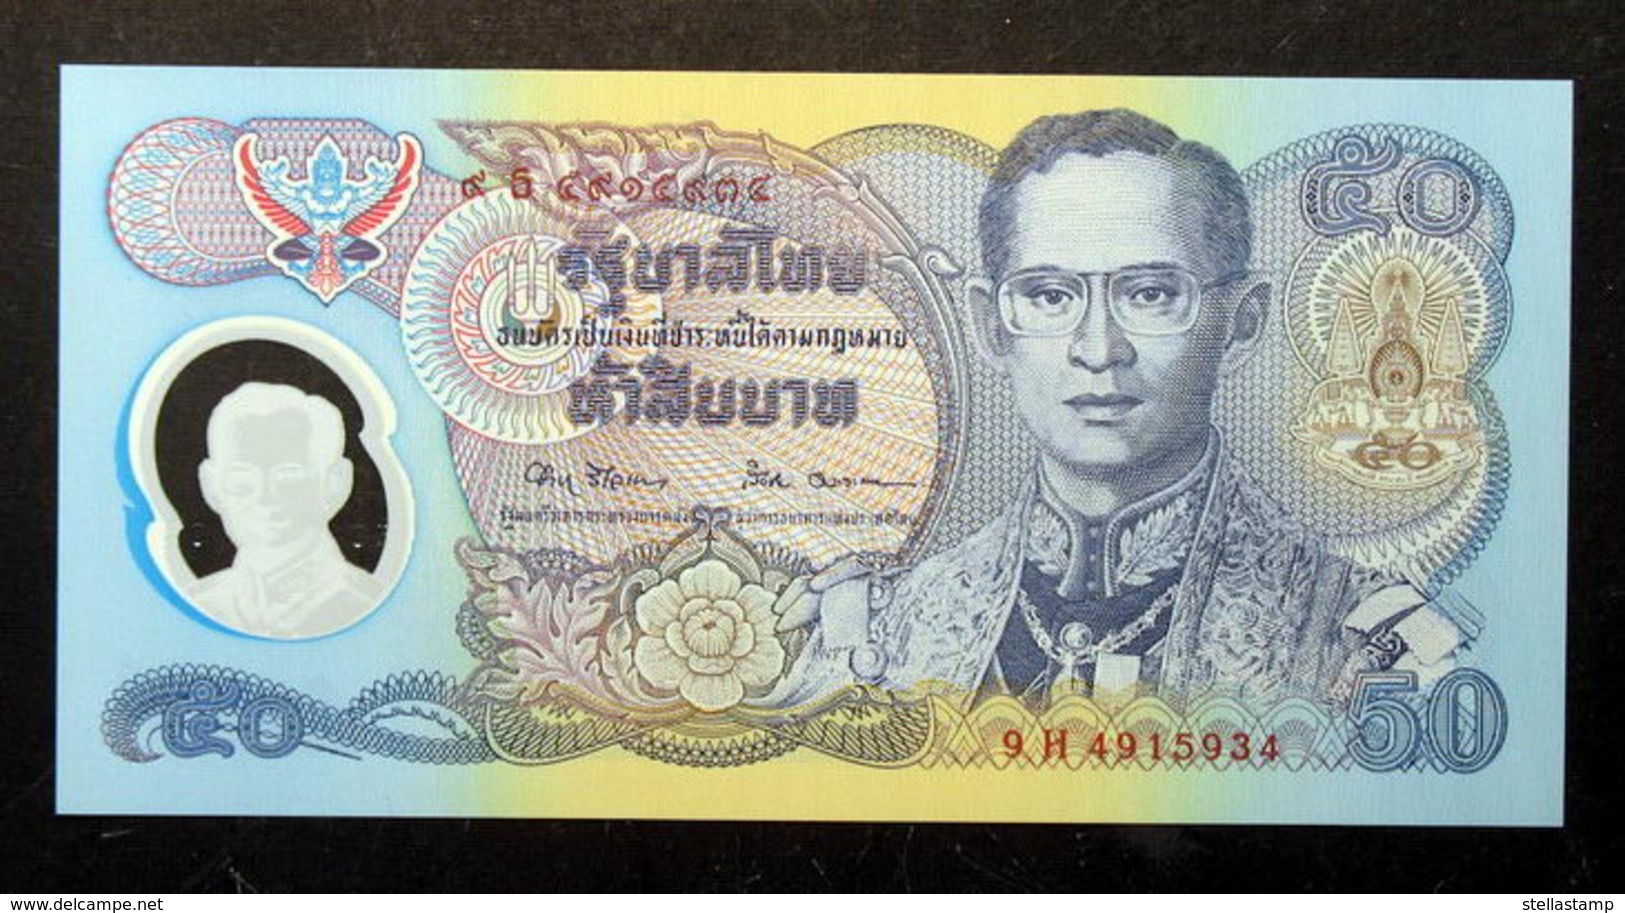 Thailand Banknote 50 Baht 1996 Golden Jubilee HM Accession To Throne Polymer P#99 SIGN#67 - Thailand